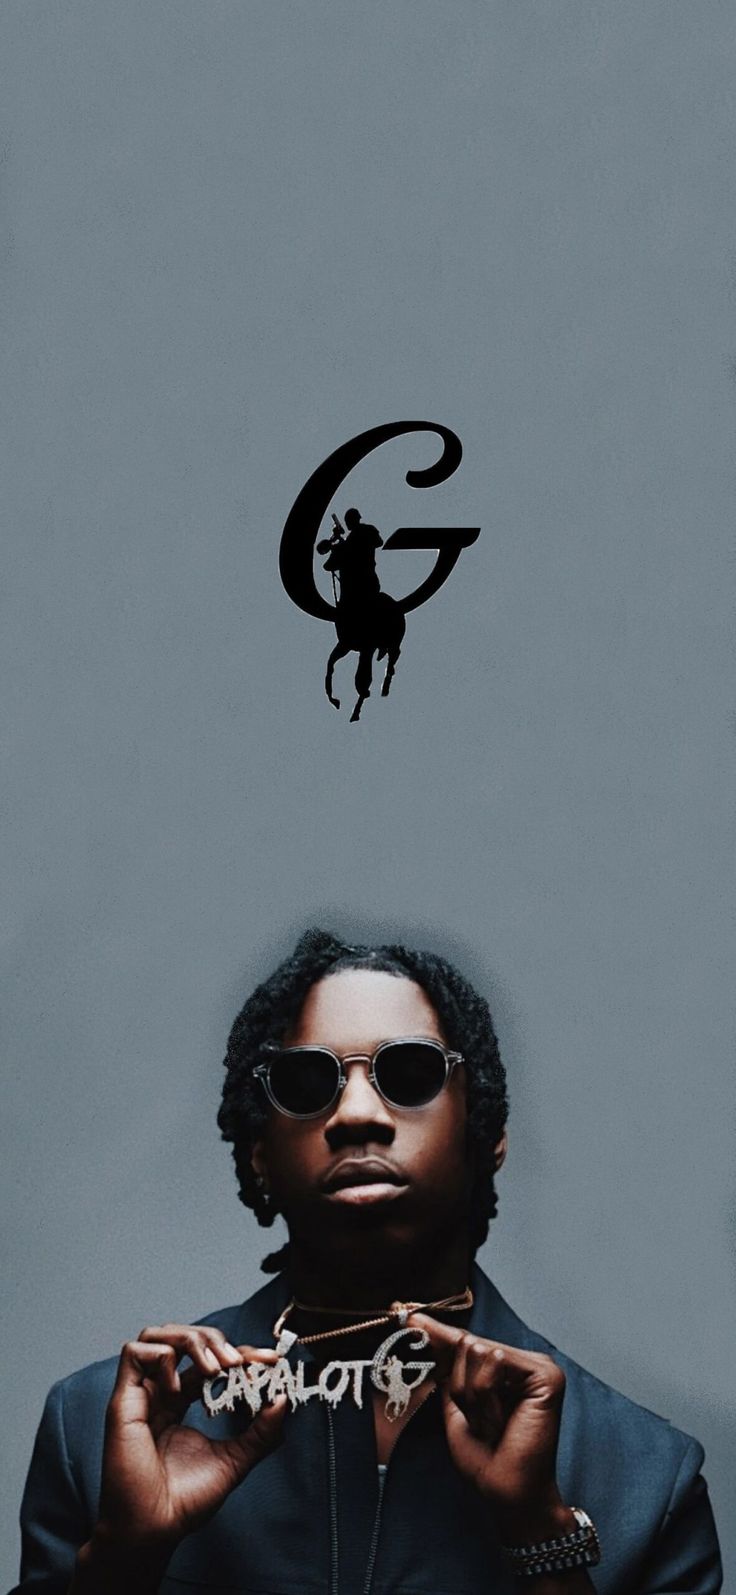 Polo g wallpaper hd discover more american rapper american singer american songwriter finer things polâ rapper wallpaper iphone celebrity wallpapers rapper